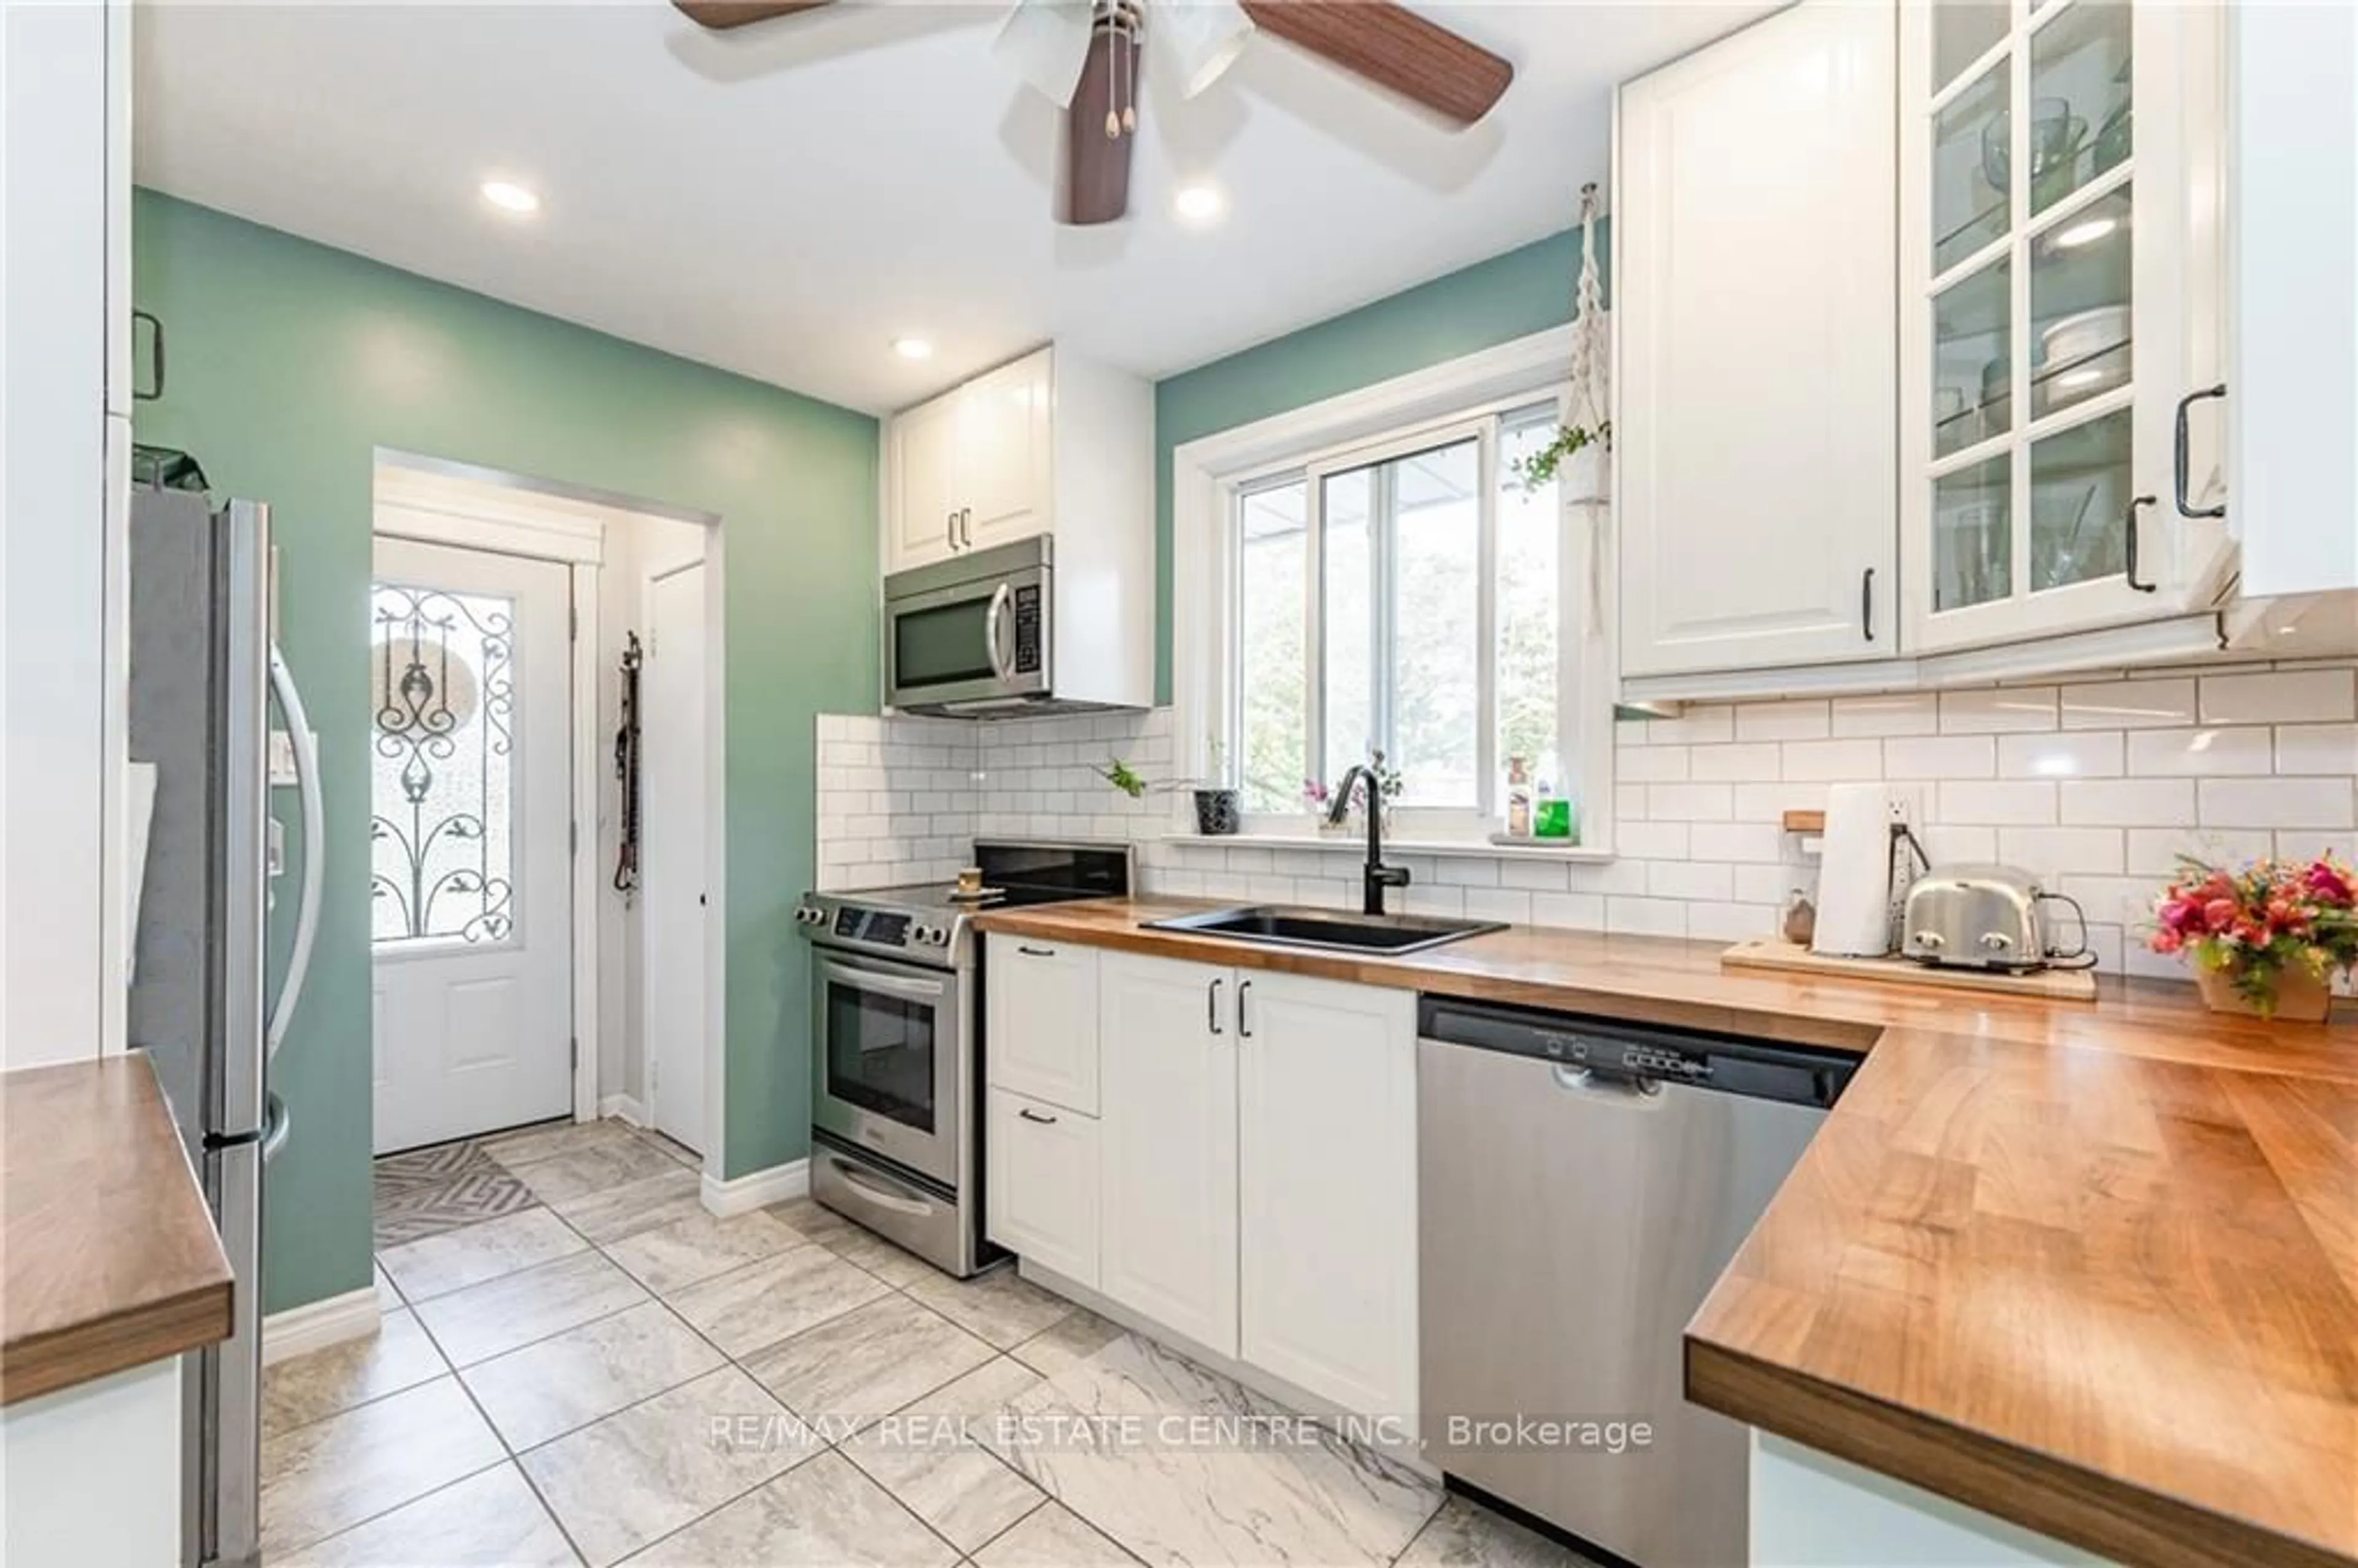 Standard kitchen for 93 Knightswood Blvd, Guelph Ontario N1E 3W8